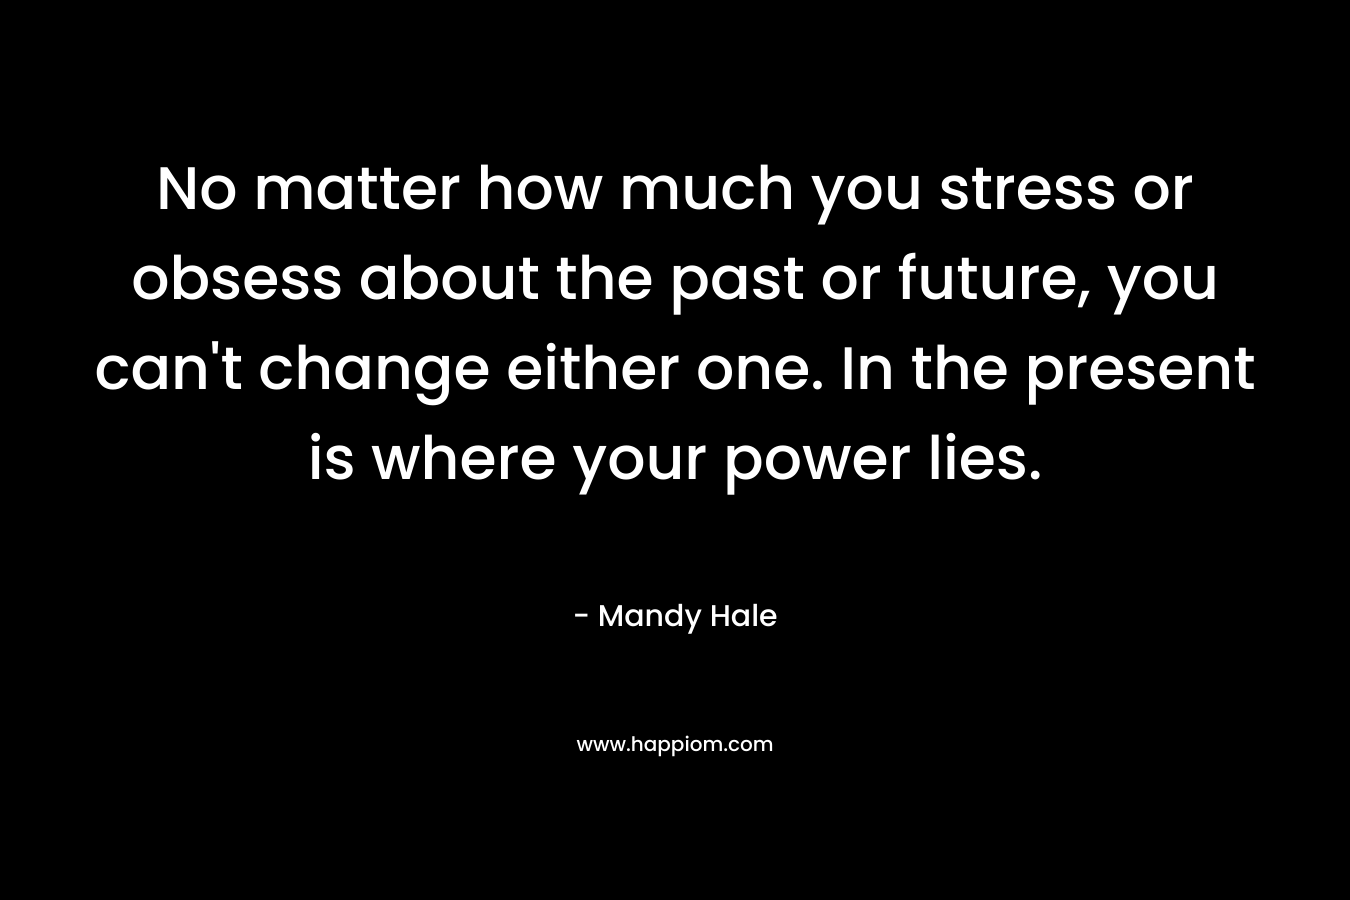 No matter how much you stress or obsess about the past or future, you can't change either one. In the present is where your power lies.